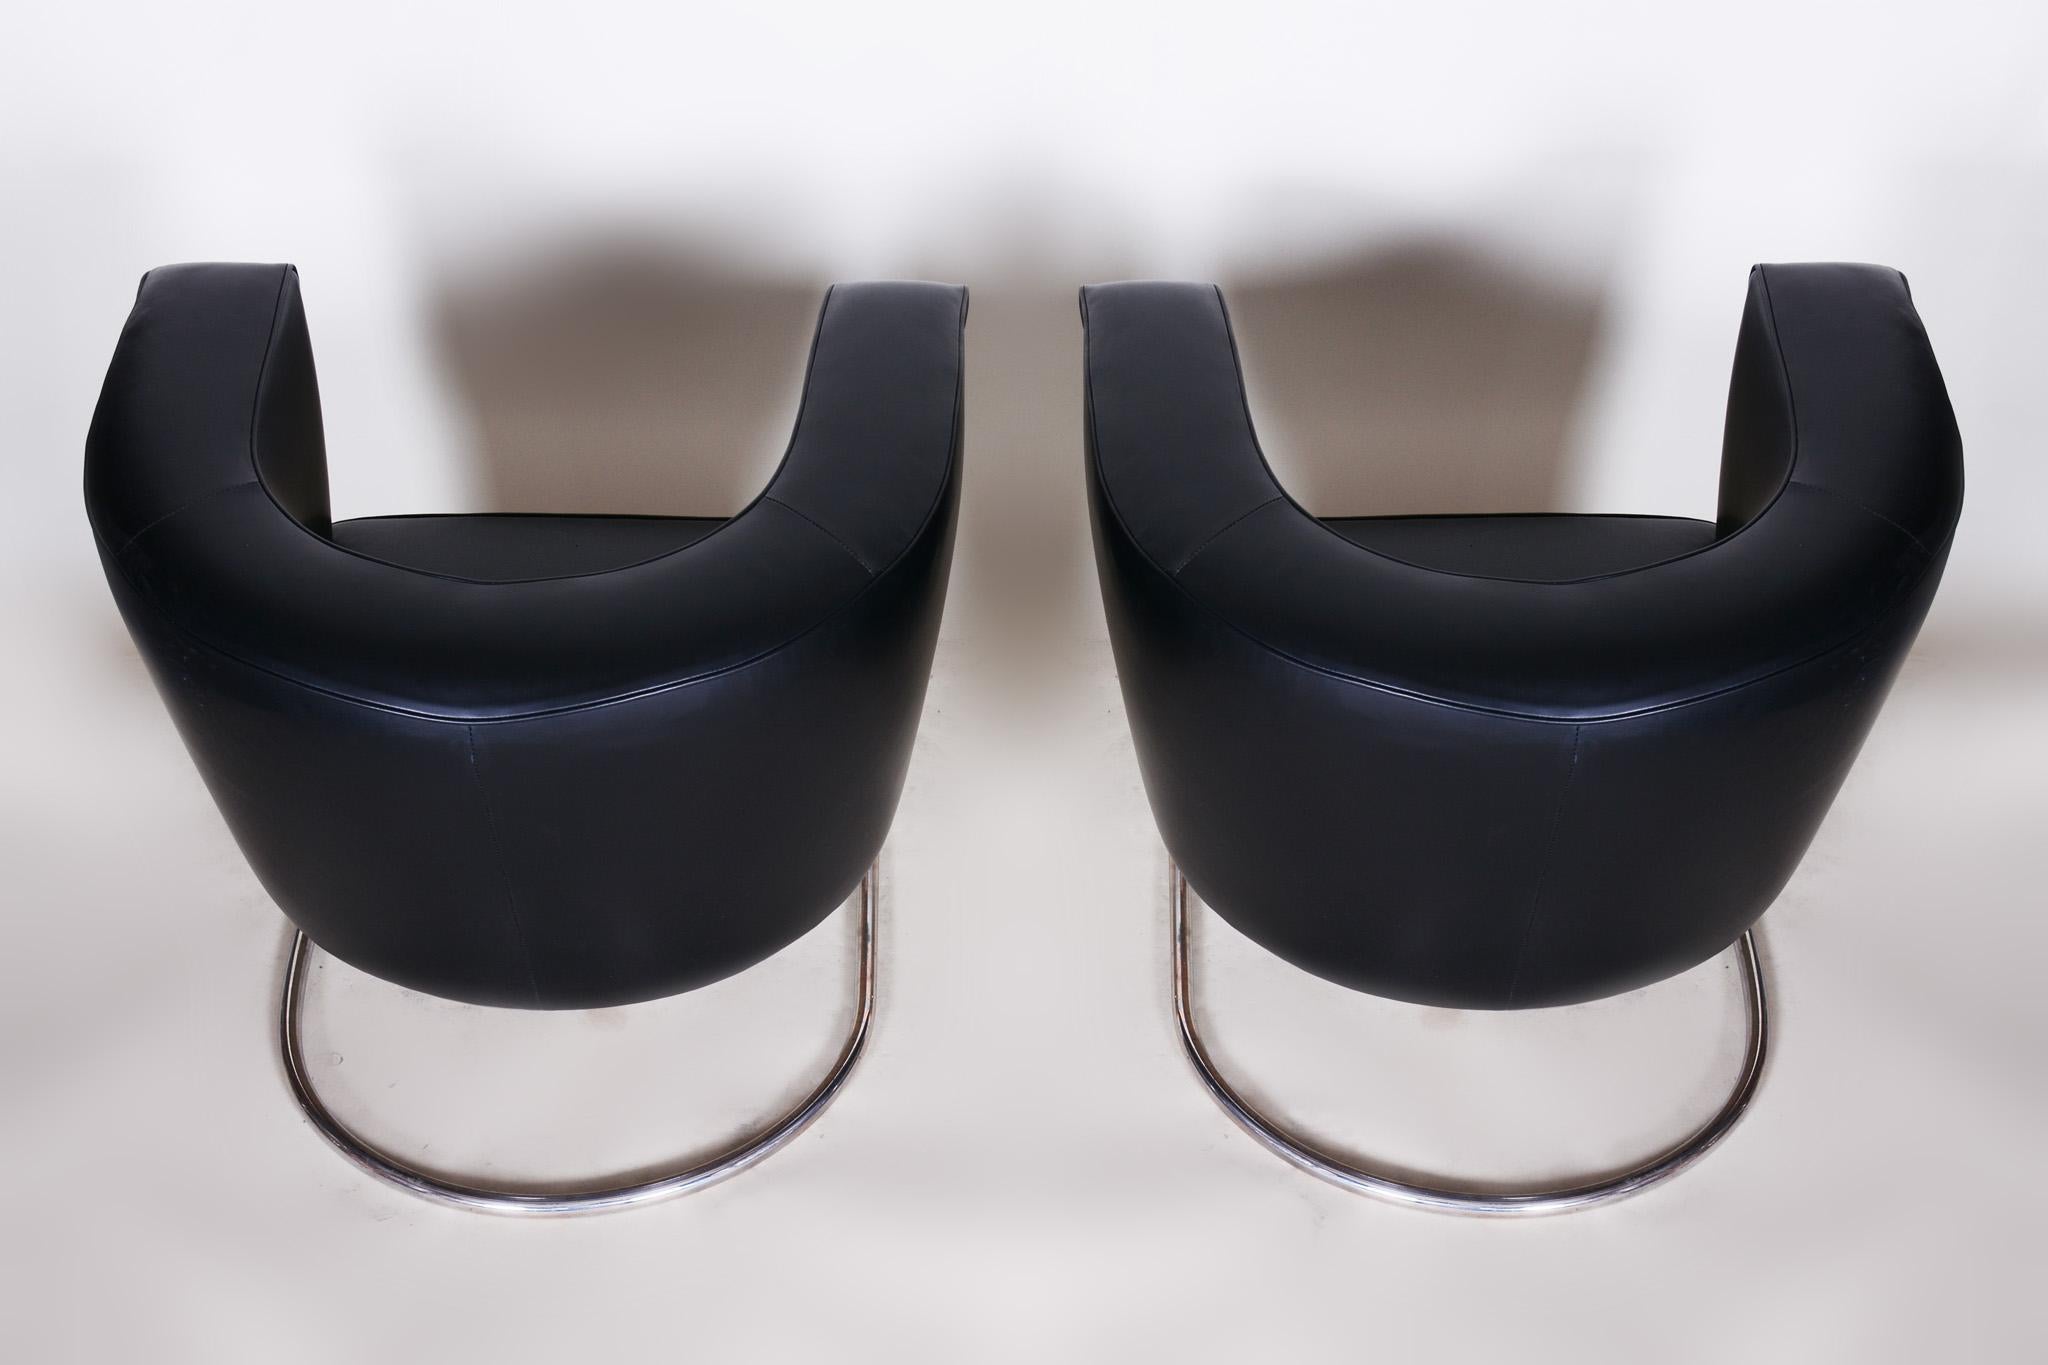 Pair of Black Art Deco Armchairs from Czechoslovakia by Jindrich Halabala, 1930s For Sale 8